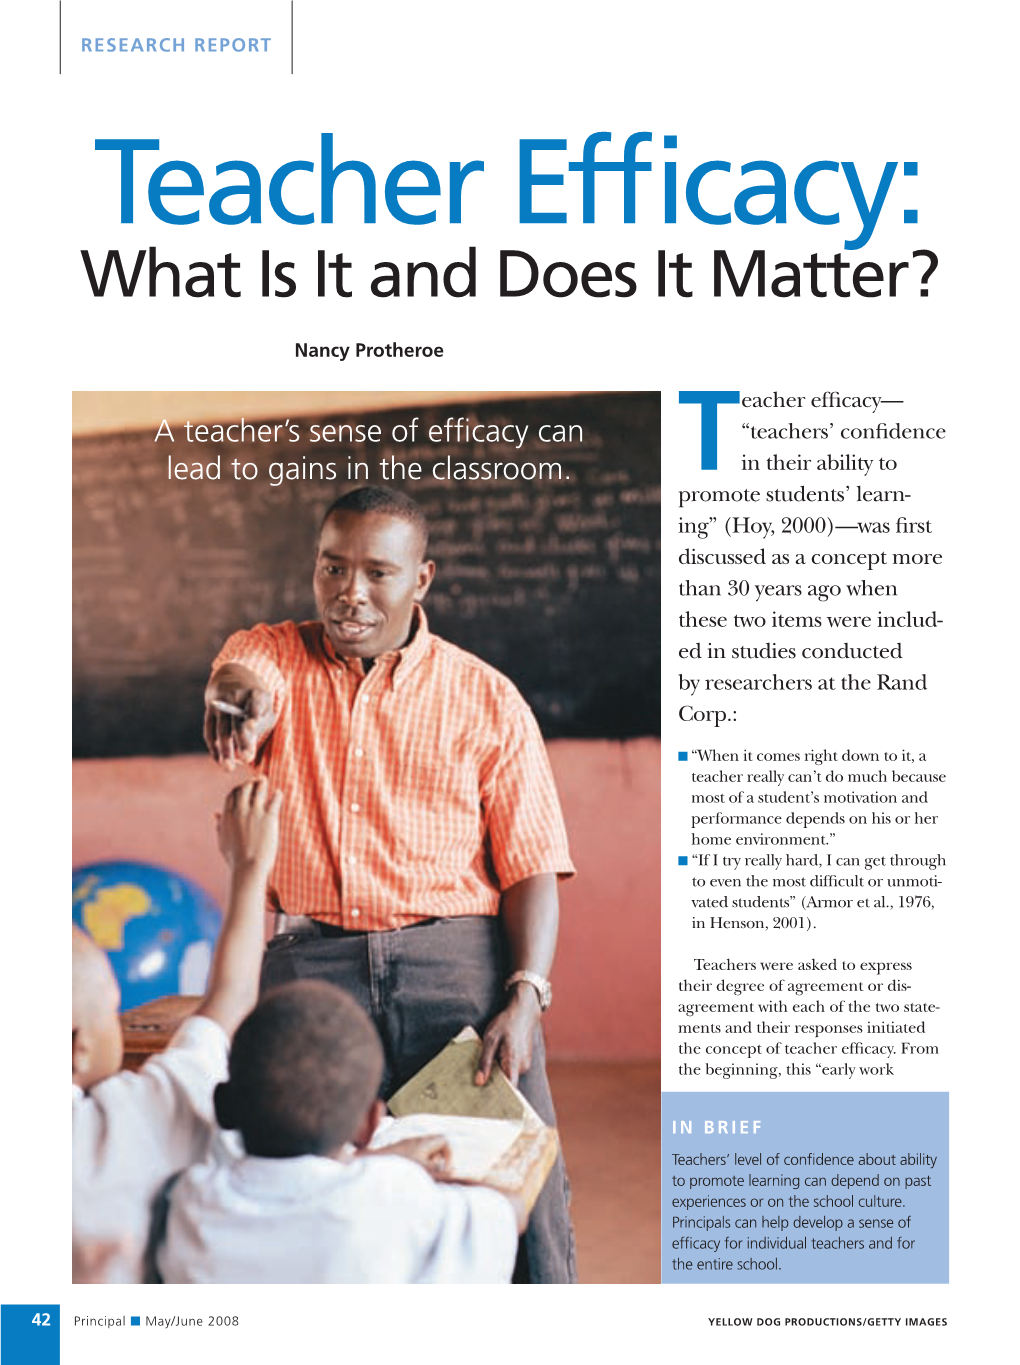 Teacher Efficacy: What Is It and Does It Matter?